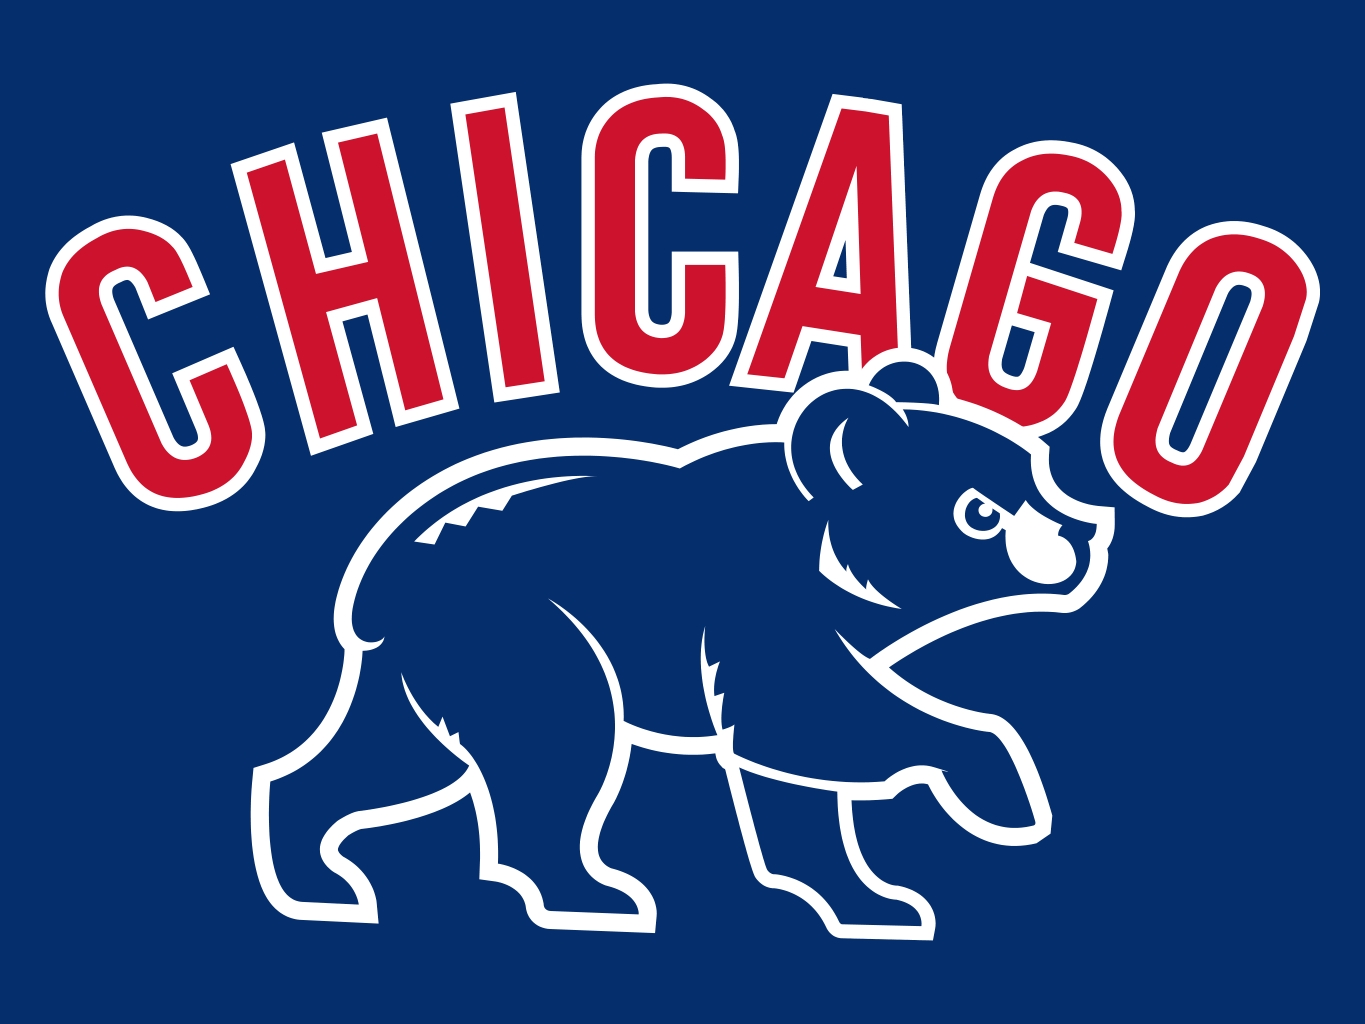 Chicago Cubs Logo Images / Chicago Cubs Logos Download At logolynx